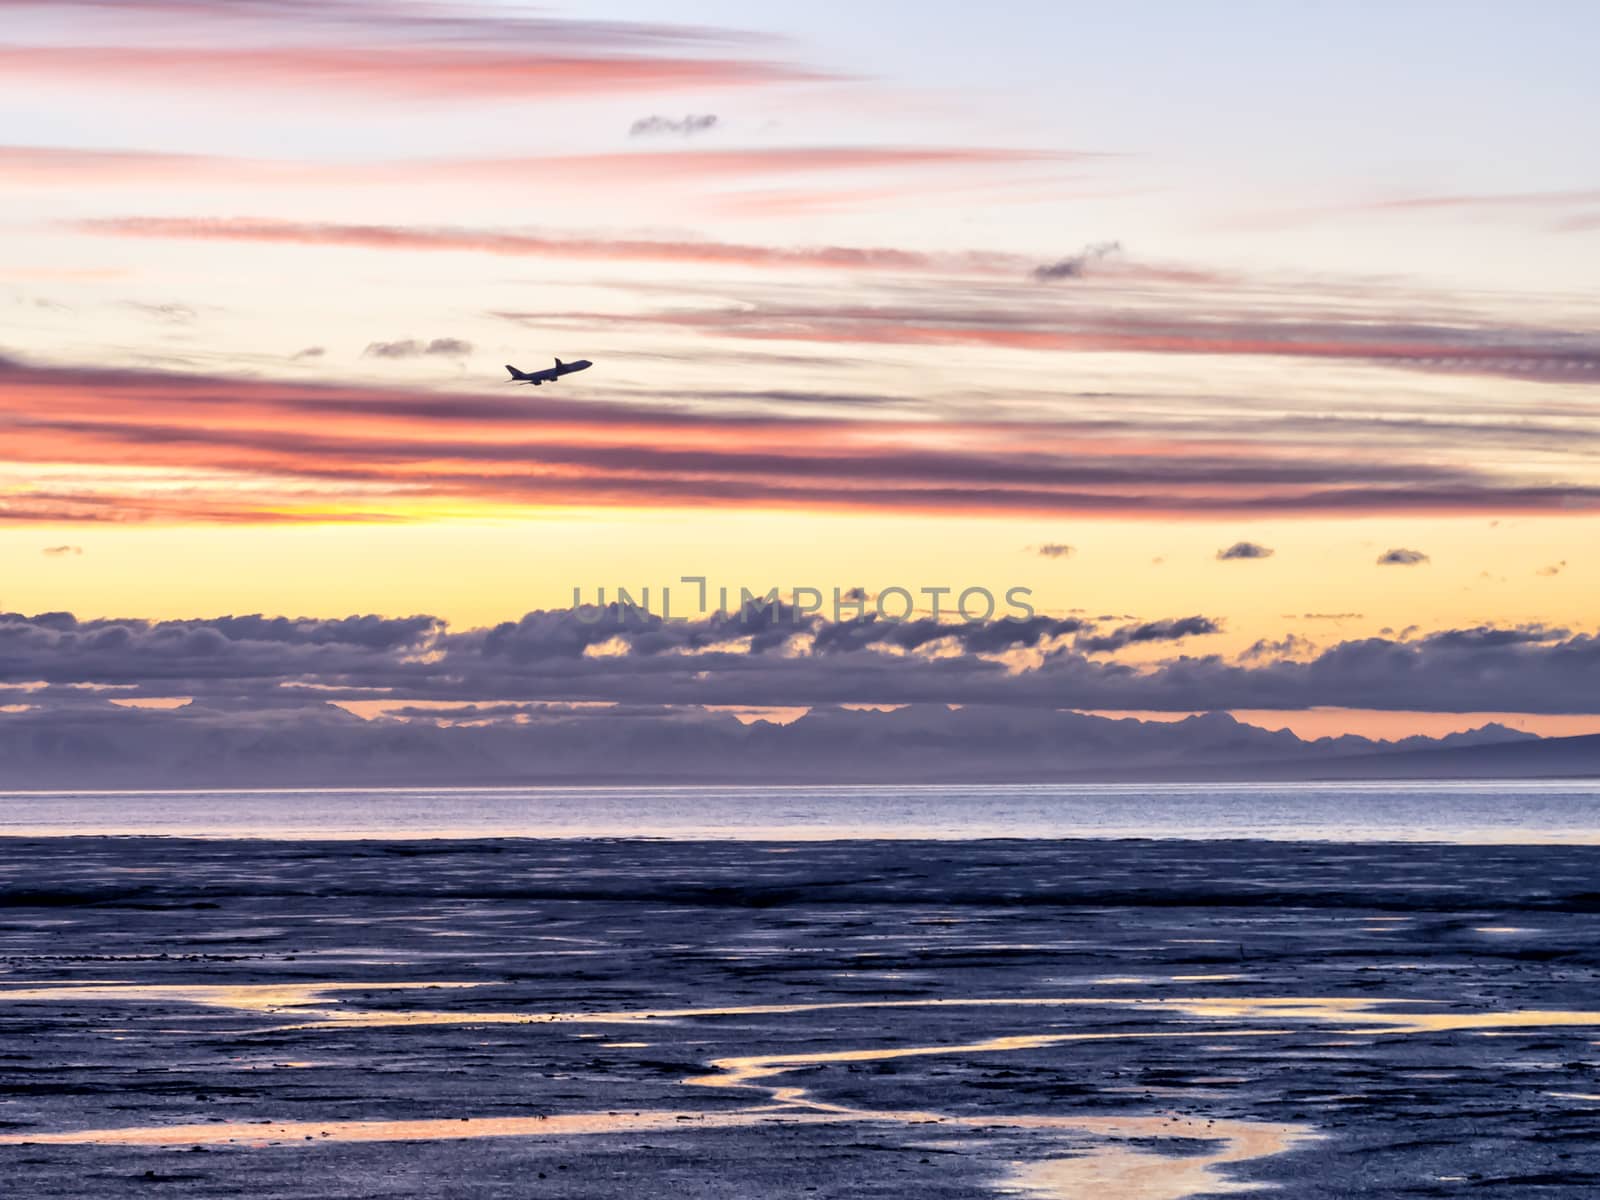 Anchorage Seashore - with a plane taking off